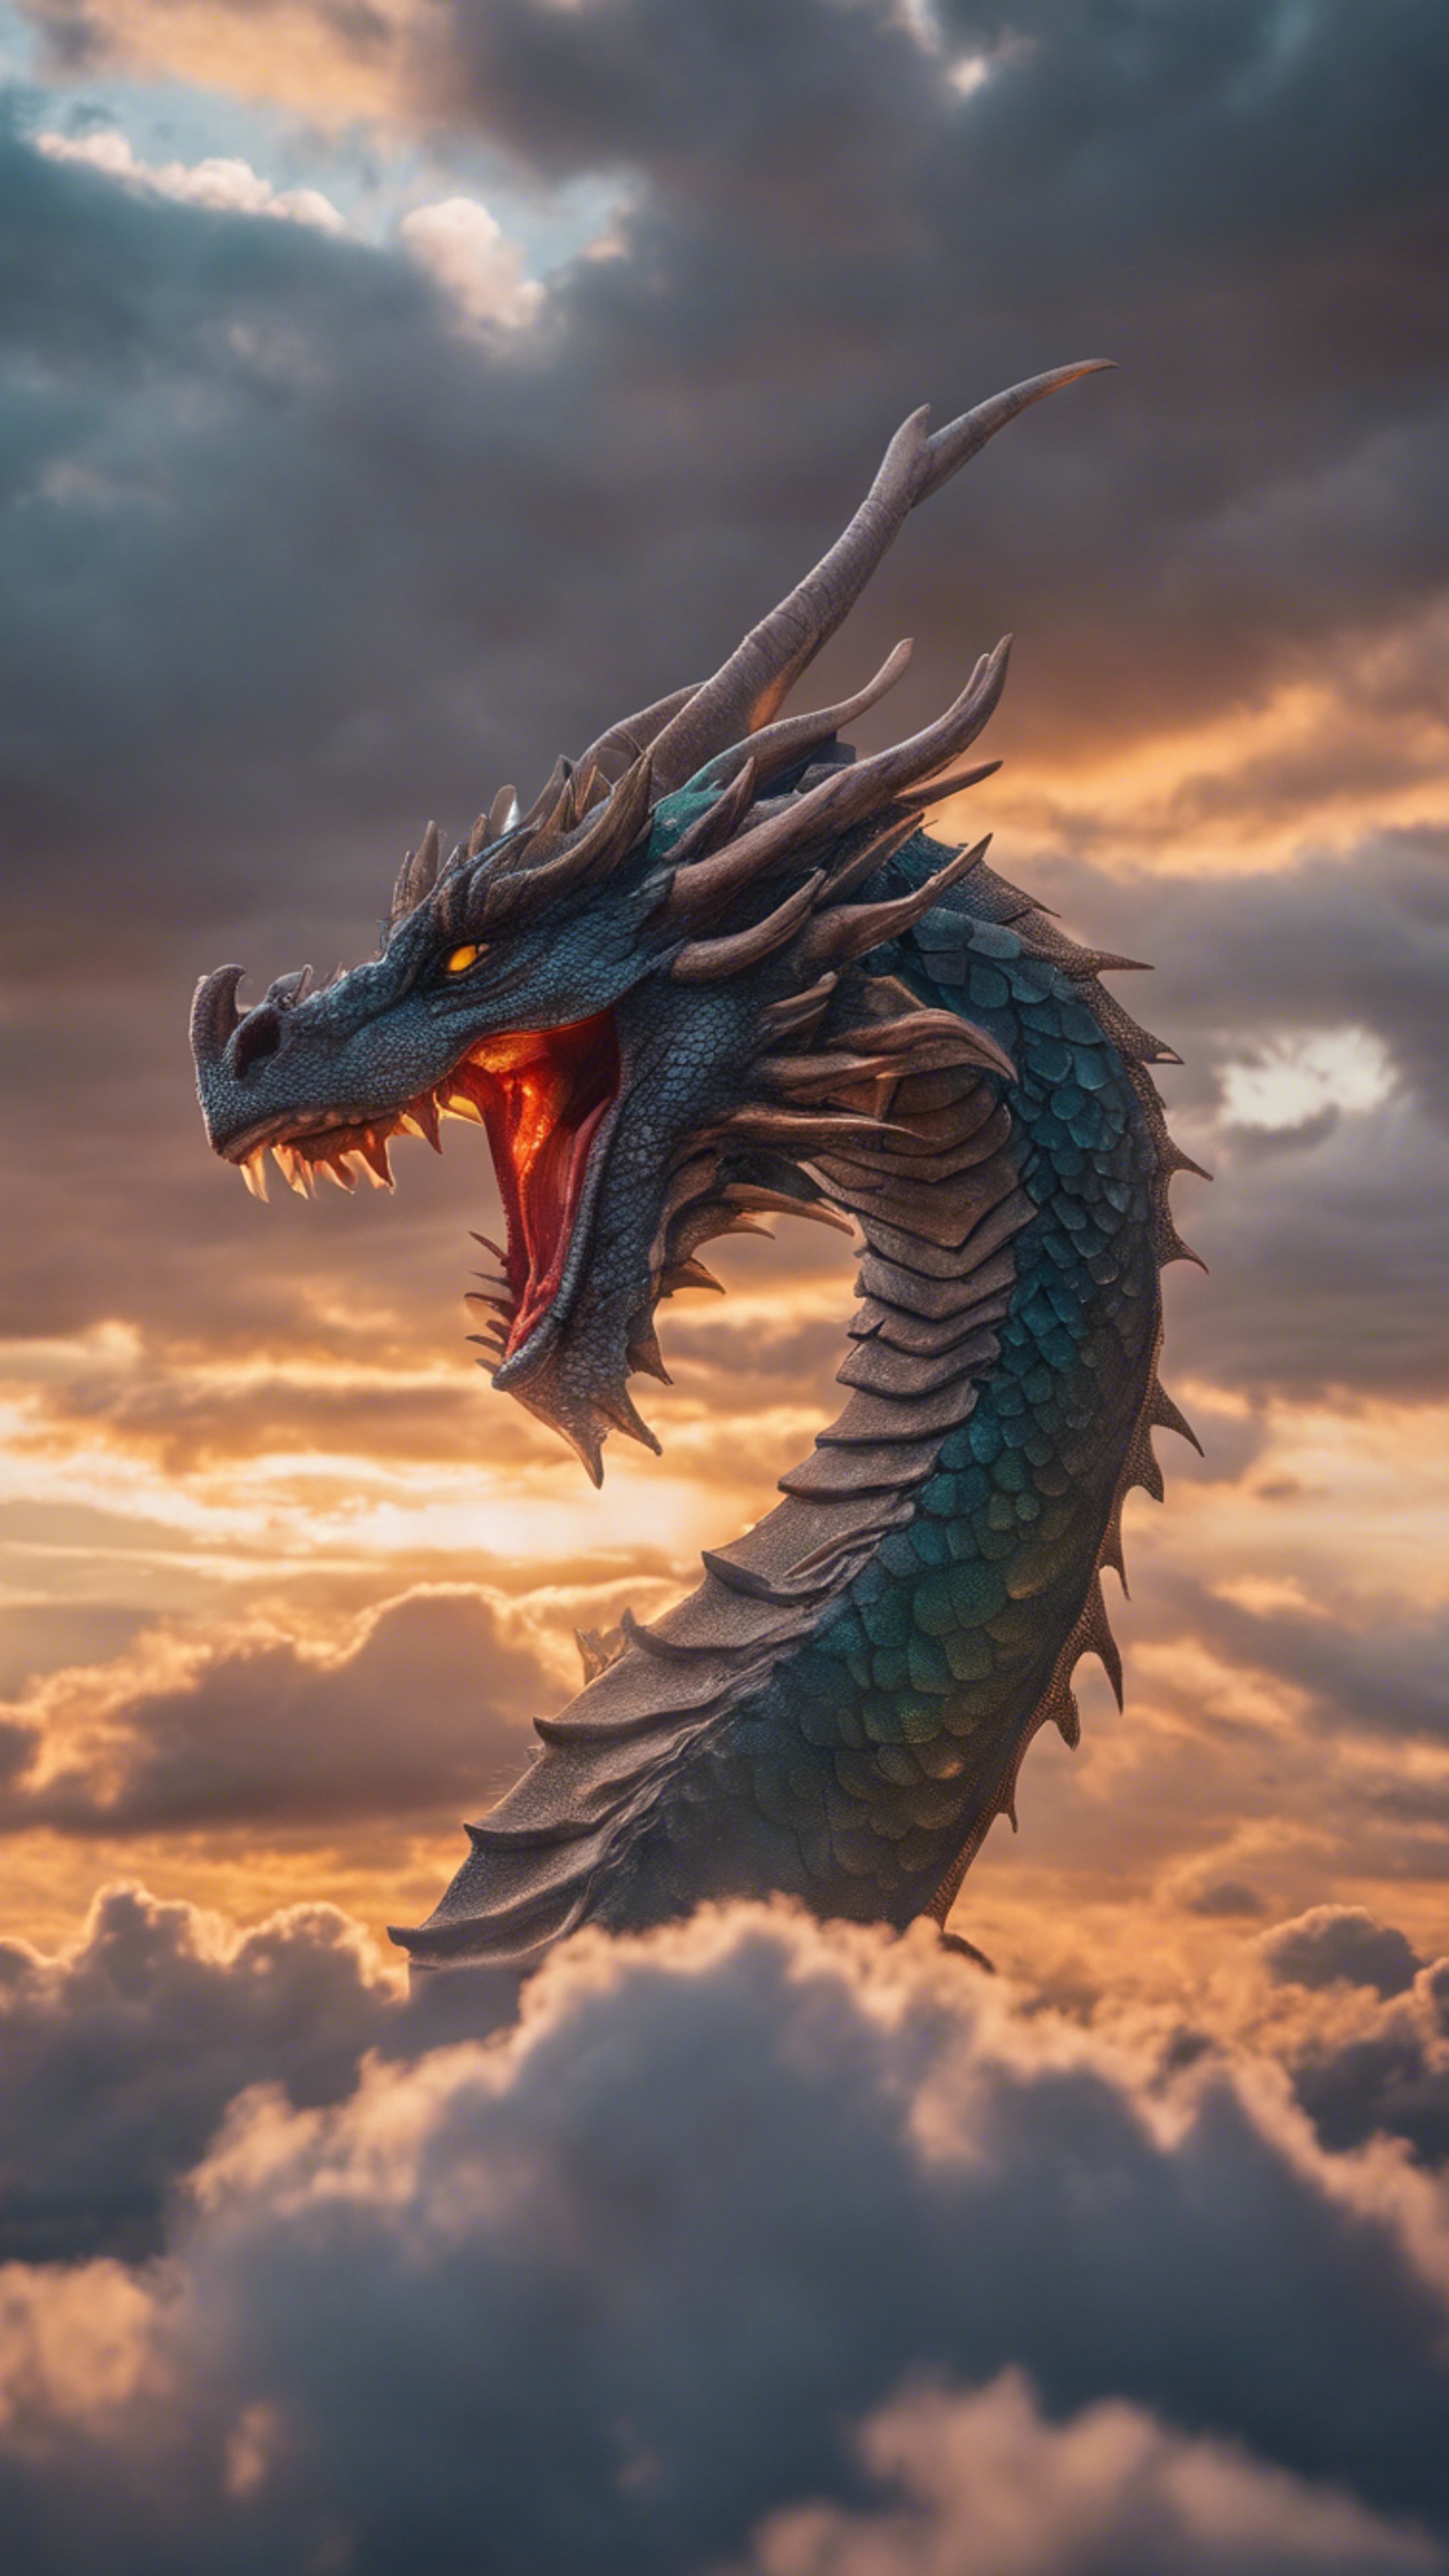 A dragon of pure light breaking through the clouds as the sun sets, its scales reflecting the vibrant colors of dusk. Wallpaper[43b0d43f7e0c44e88acd]